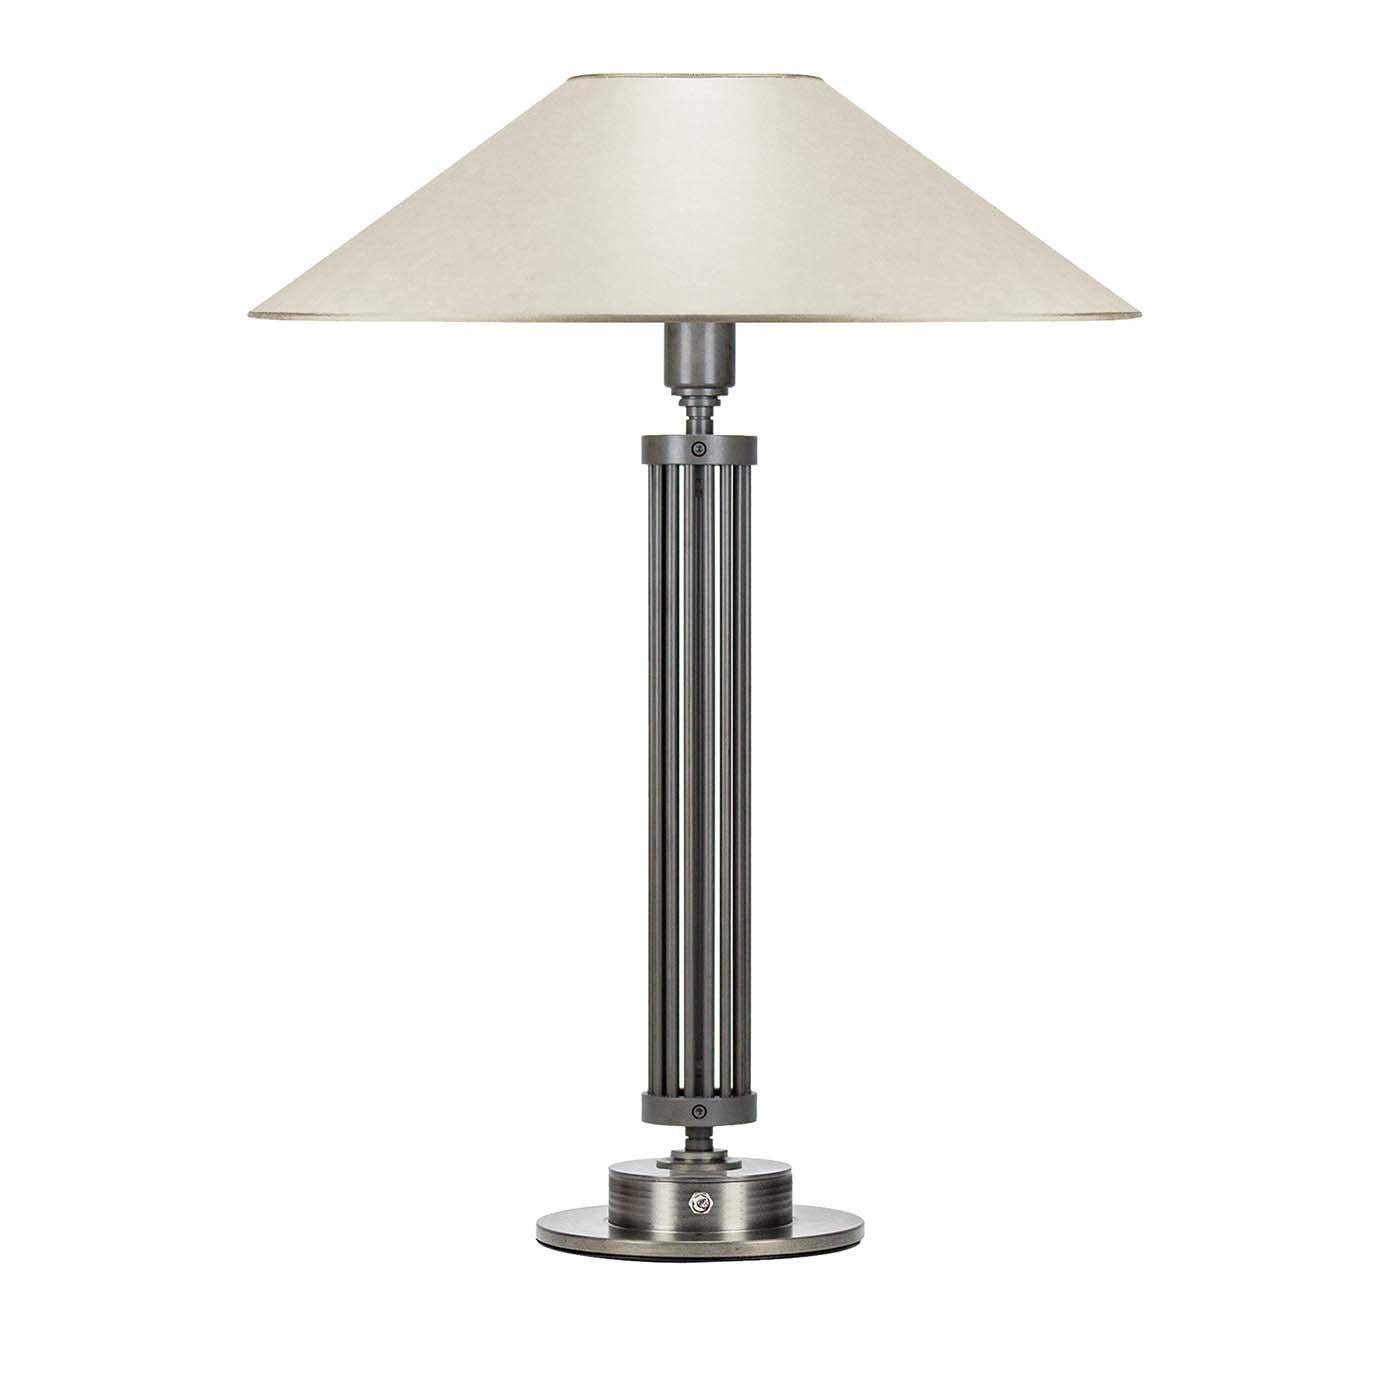 With an attention to detail that goes beyond functionality, this table lamp merges classic lines with a modern sensibility in a silhouette that will look equally stunning in a contemporary and traditional decor. The linear structure is handcrafted